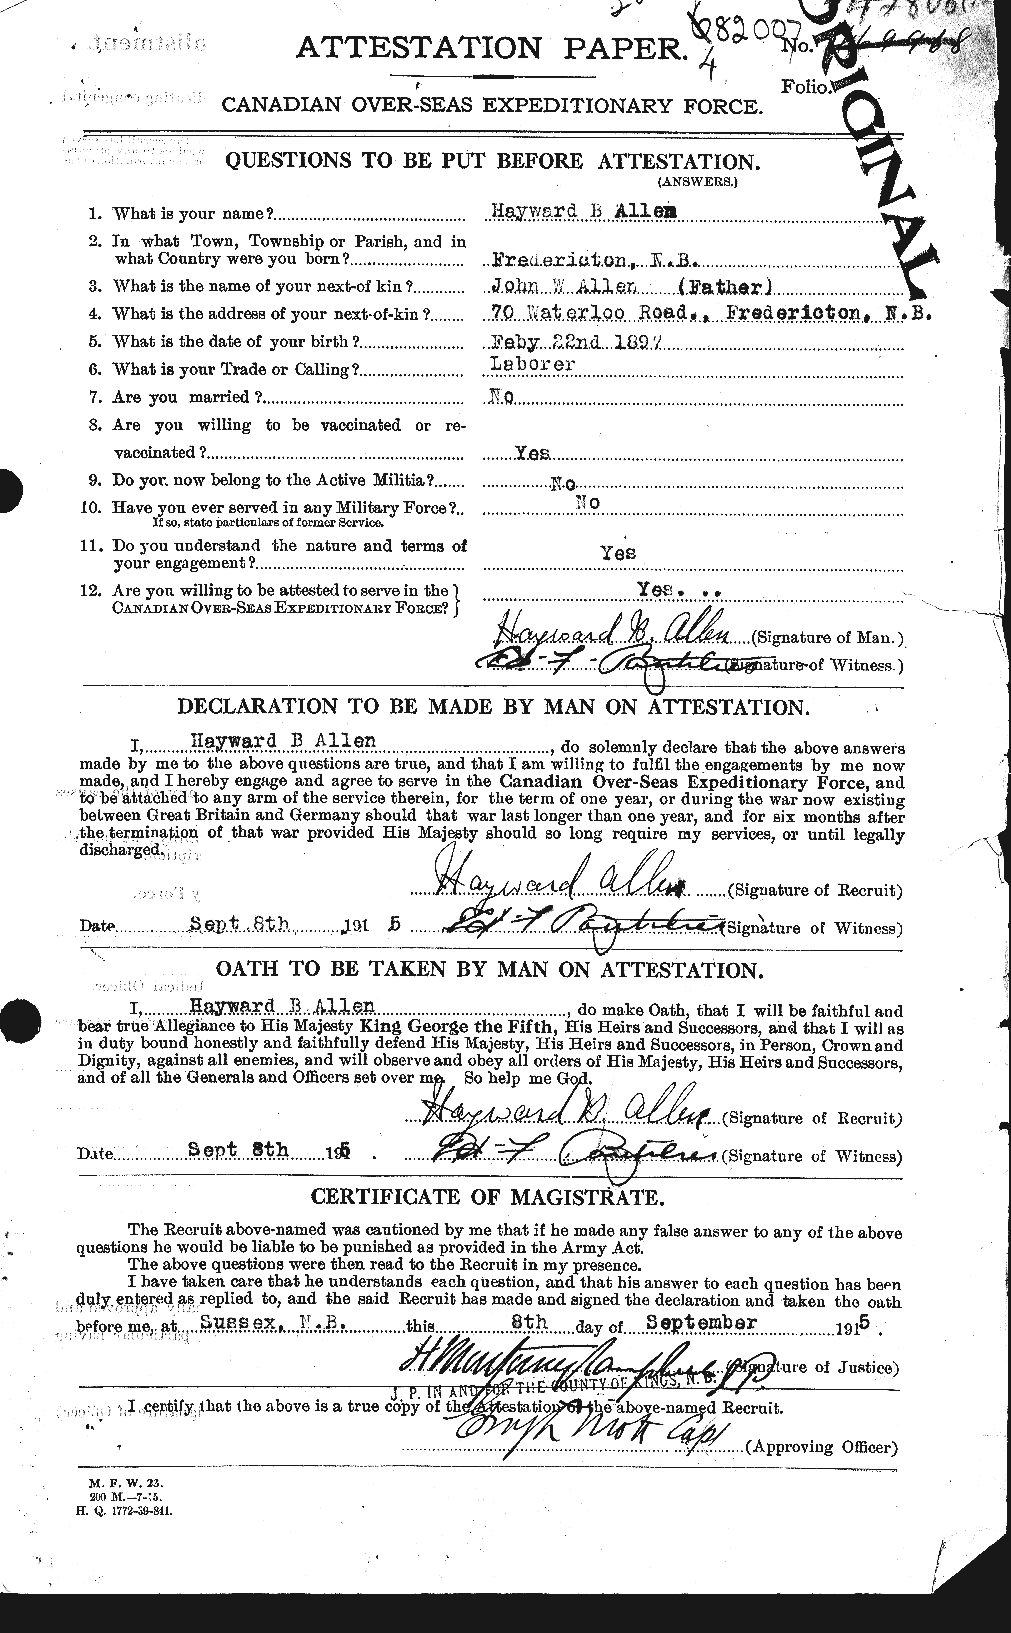 Personnel Records of the First World War - CEF 206362a